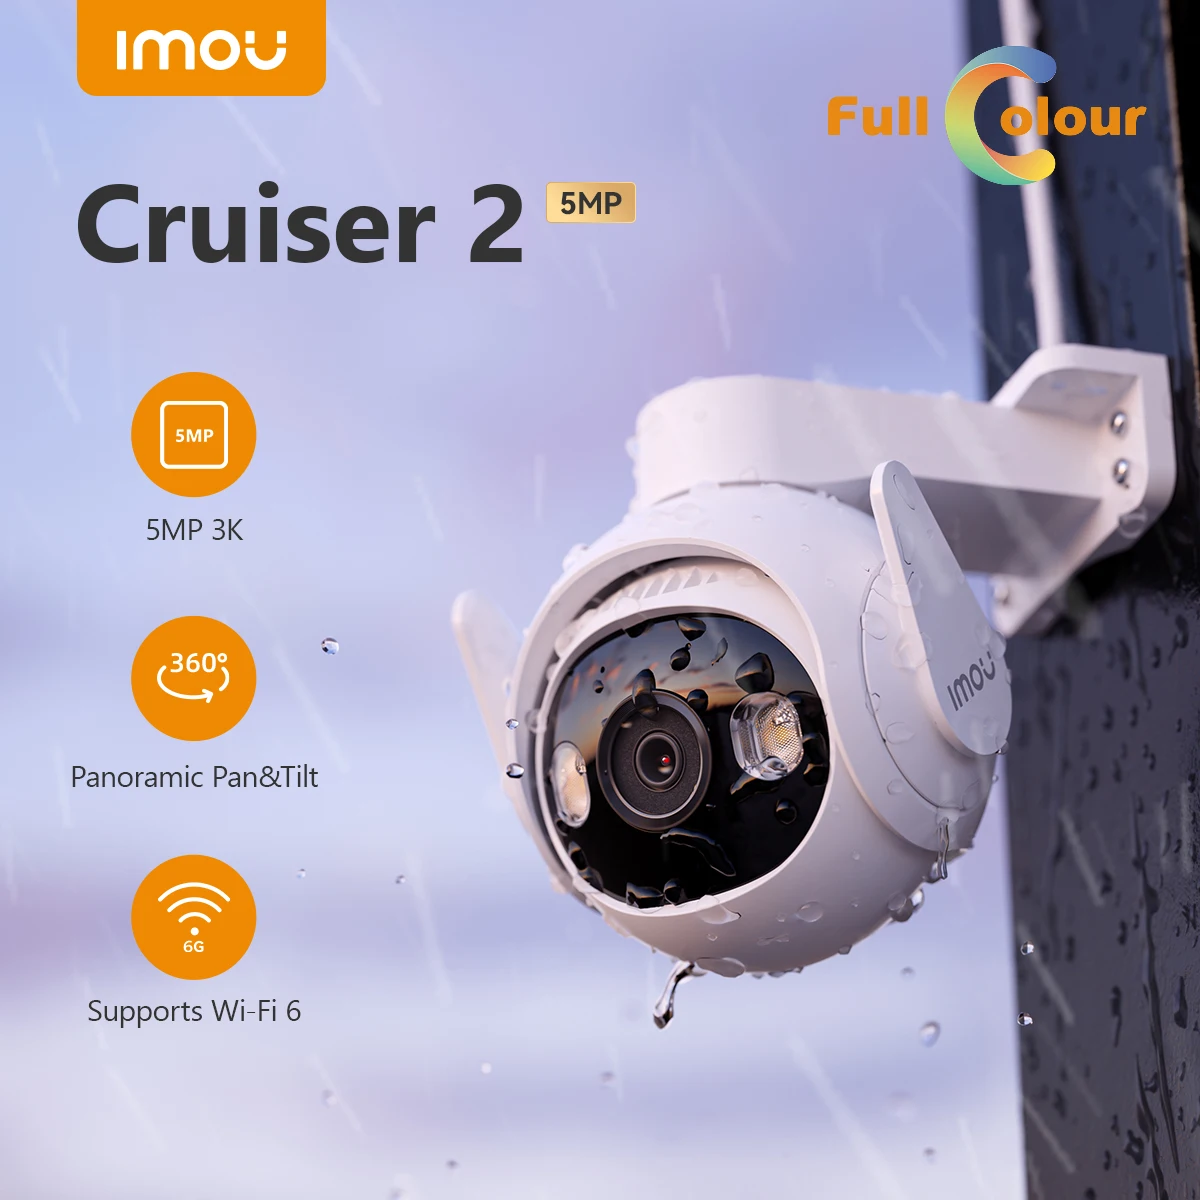 

IMOU Cruiser 2 5MP Wi-Fi Outdoor Security Camera AI Smart Tracking Human Vehicle Detection IP66 Smart Night Vision Two Way Talk